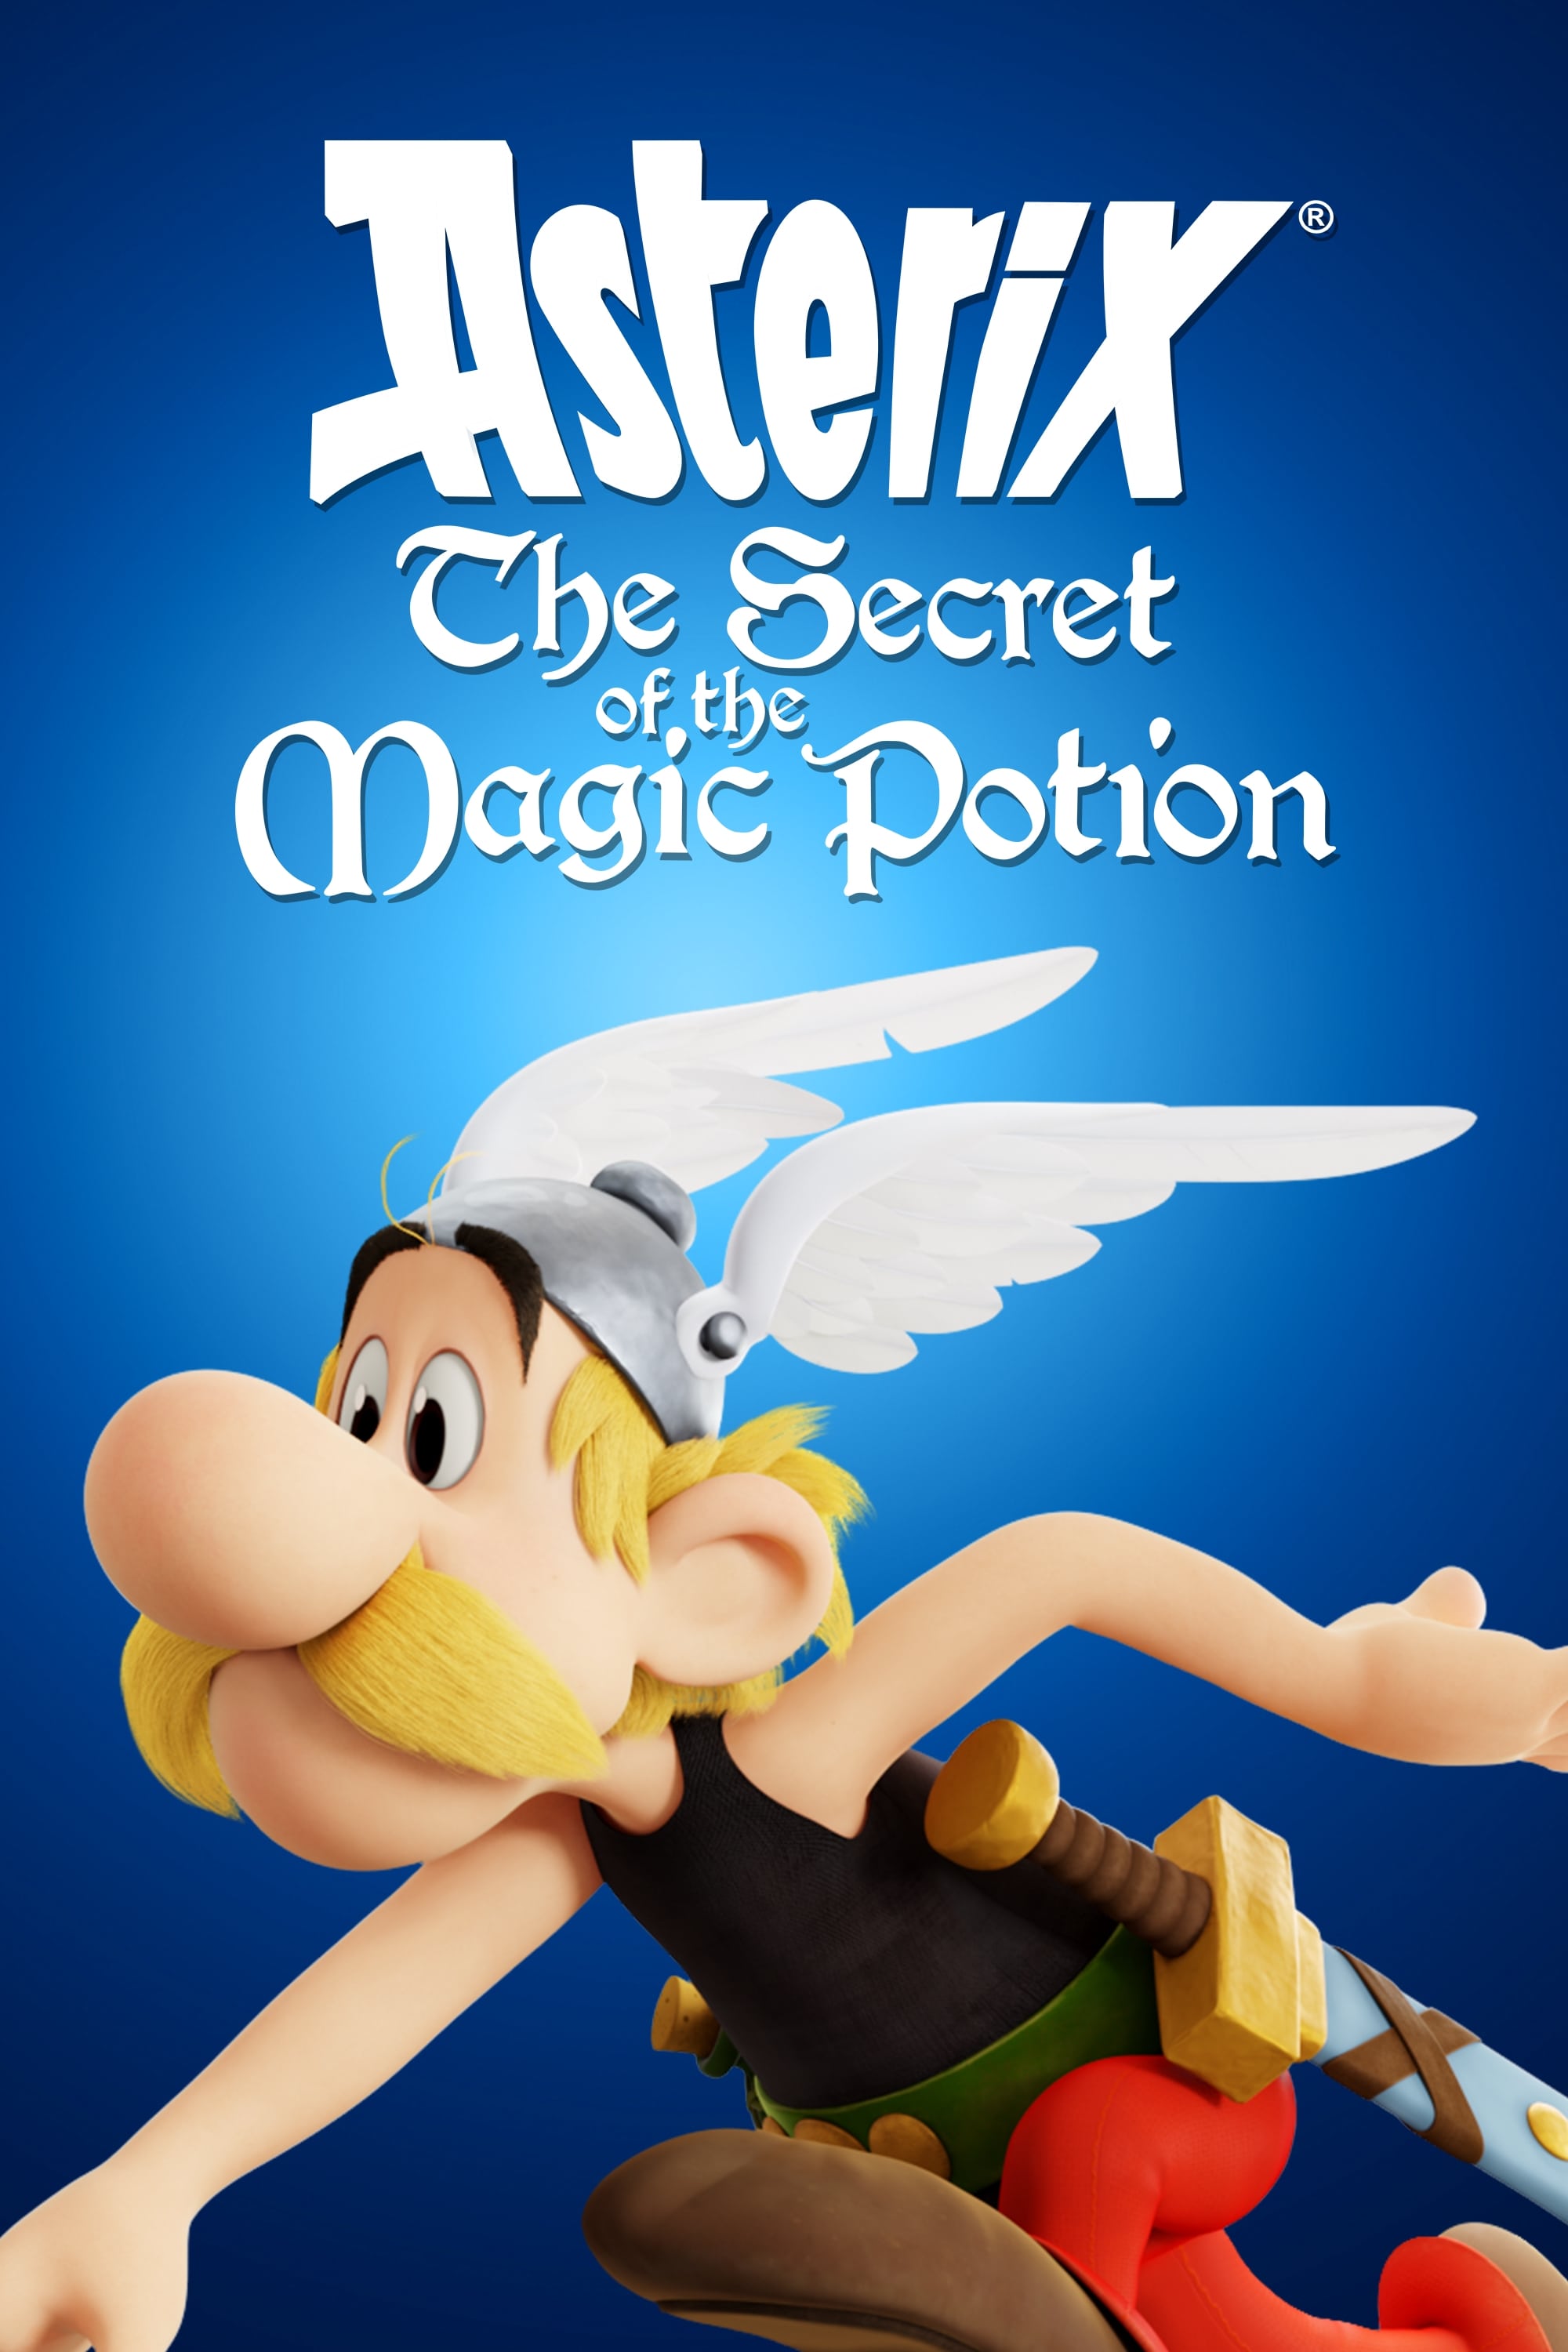 Asterix: The Secret of the Magic Potion (2018) - Posters — The Movie - Asterix The Secret Of The Magic Potion